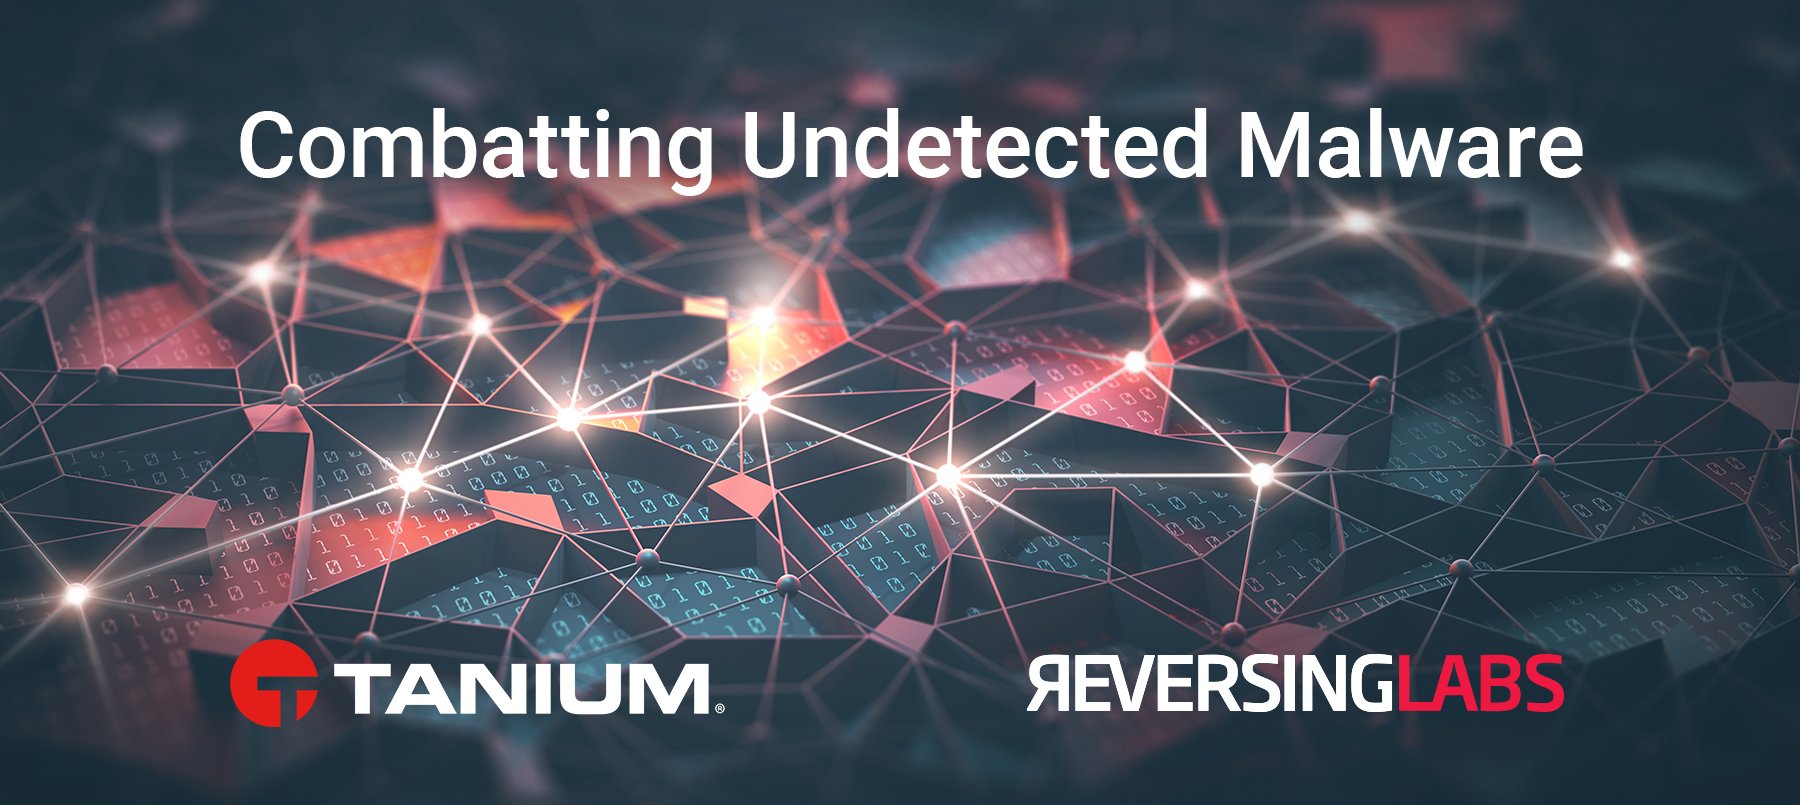 Customer Use Case: Combatting Undetected Malware with Tanium and ReversingLabs